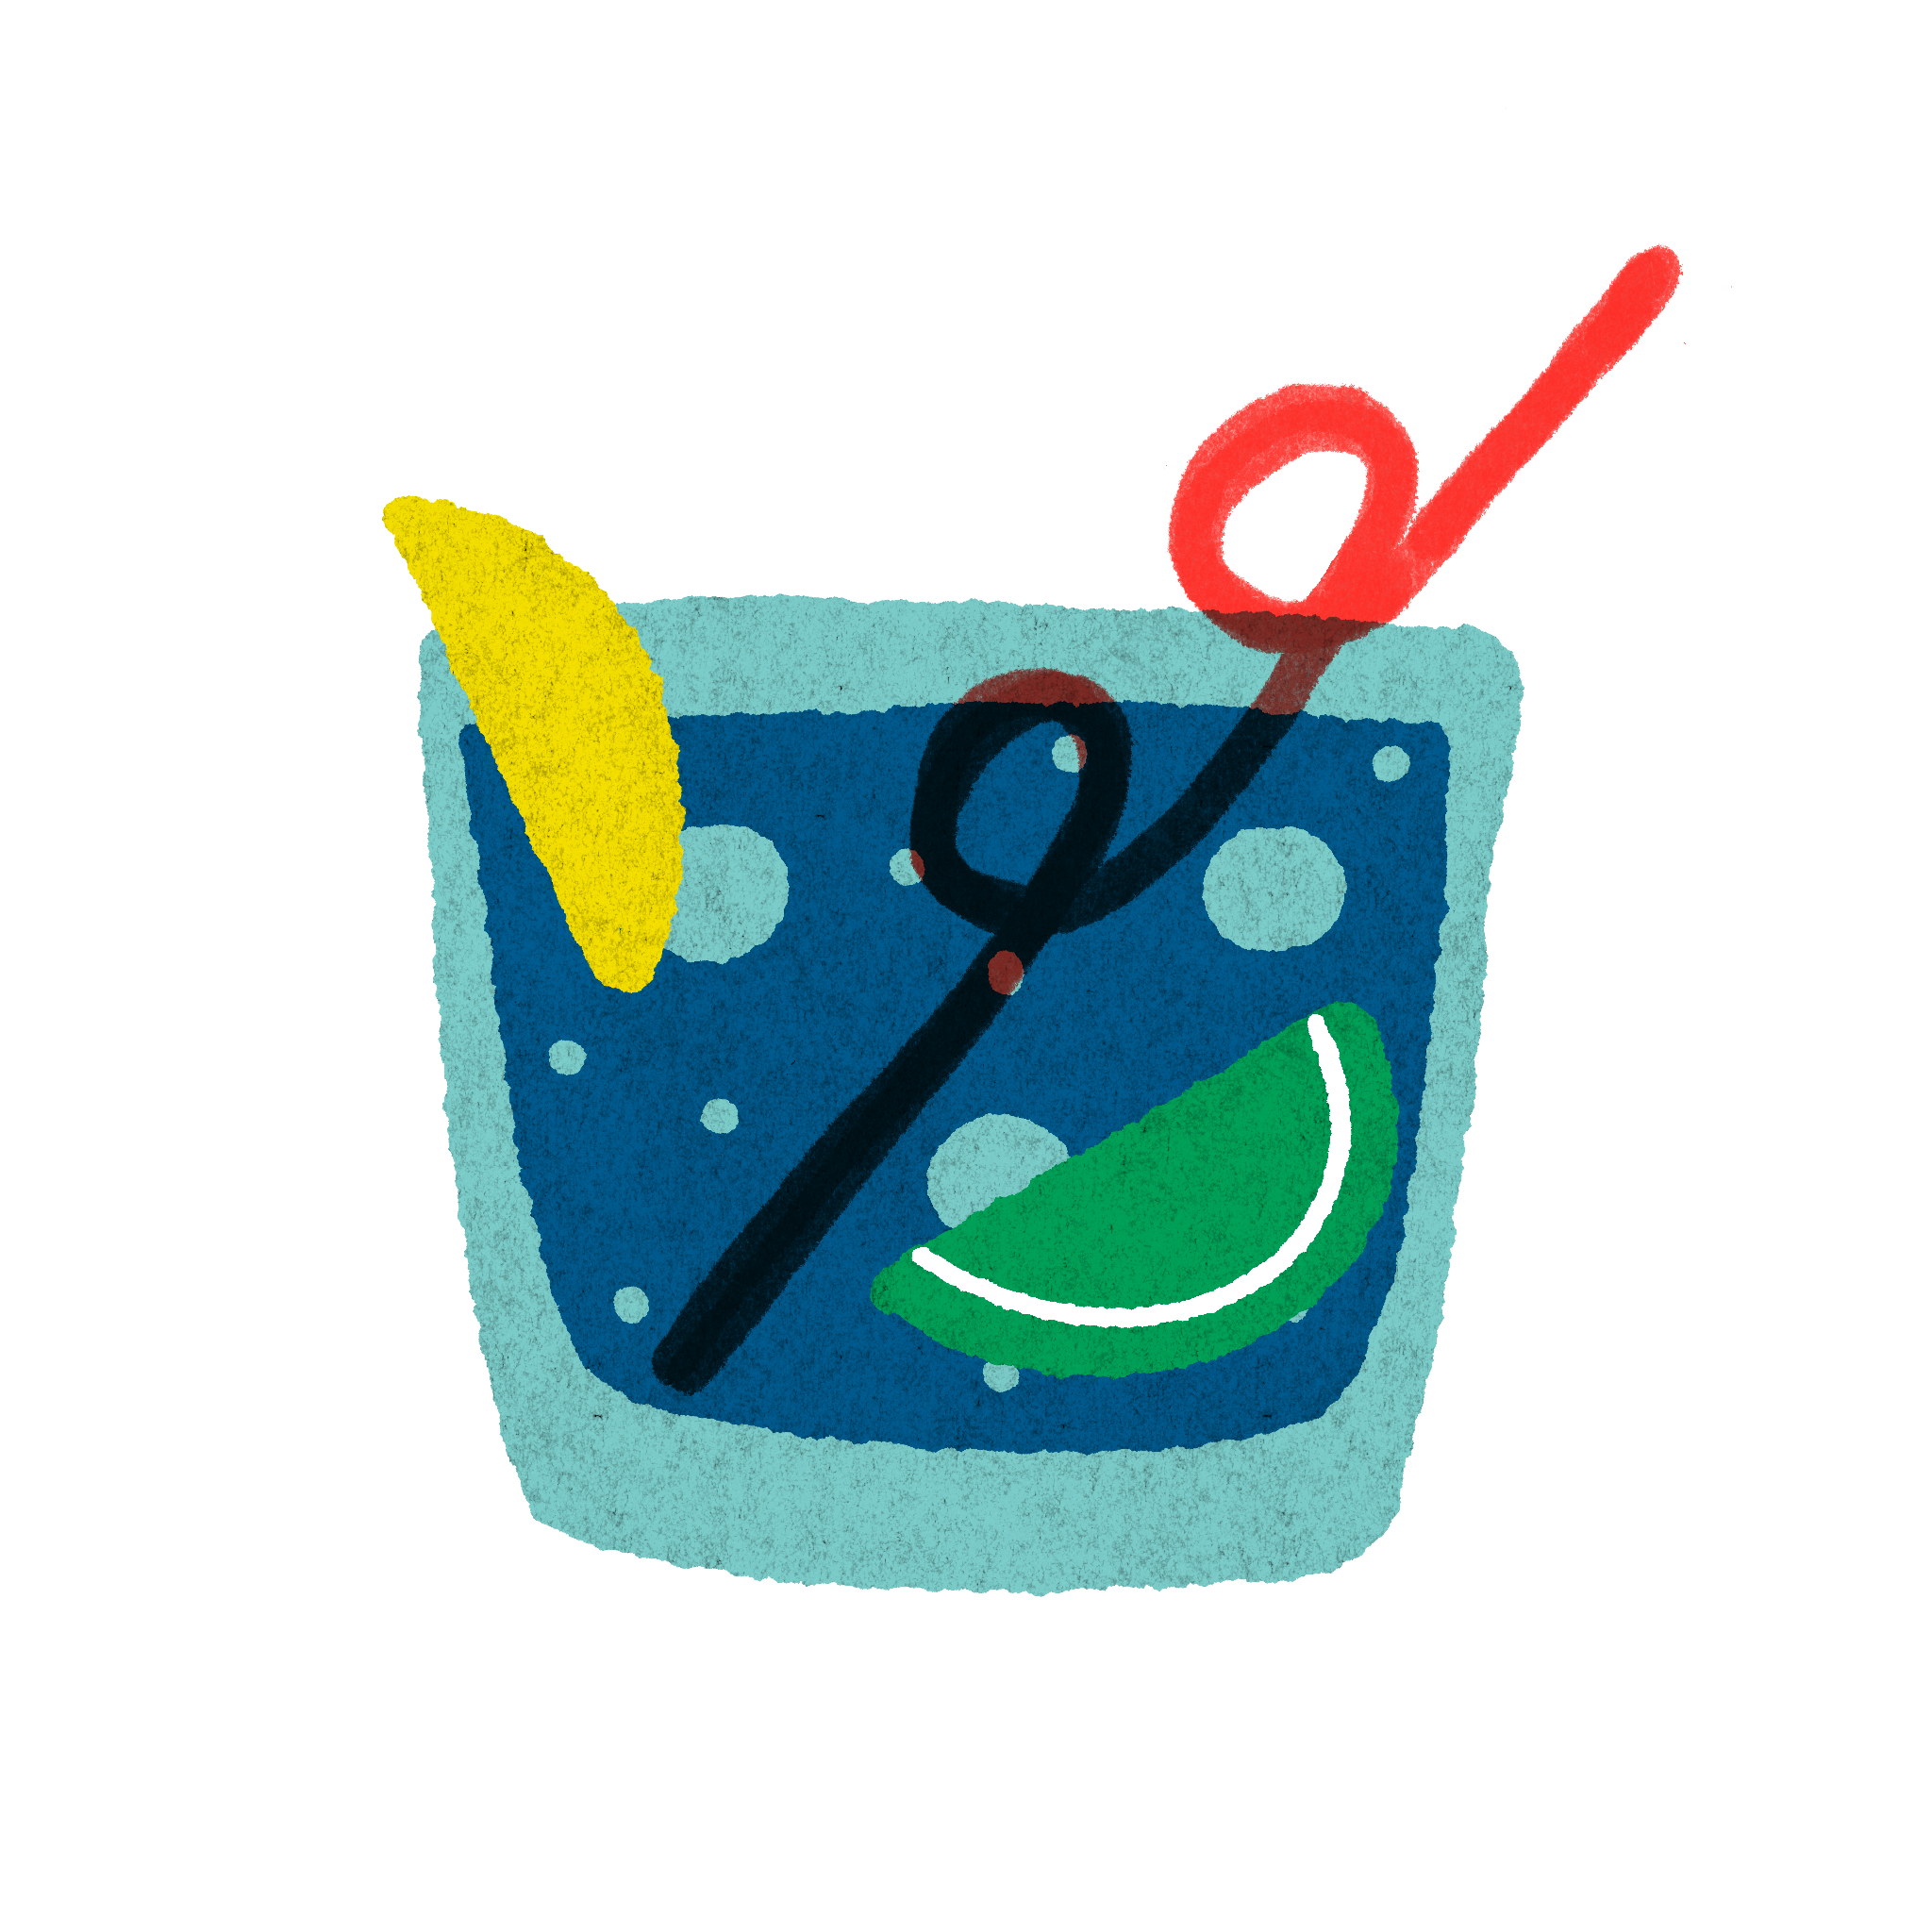 Illustration of a small glass of seltzer with lemon lime and a straw